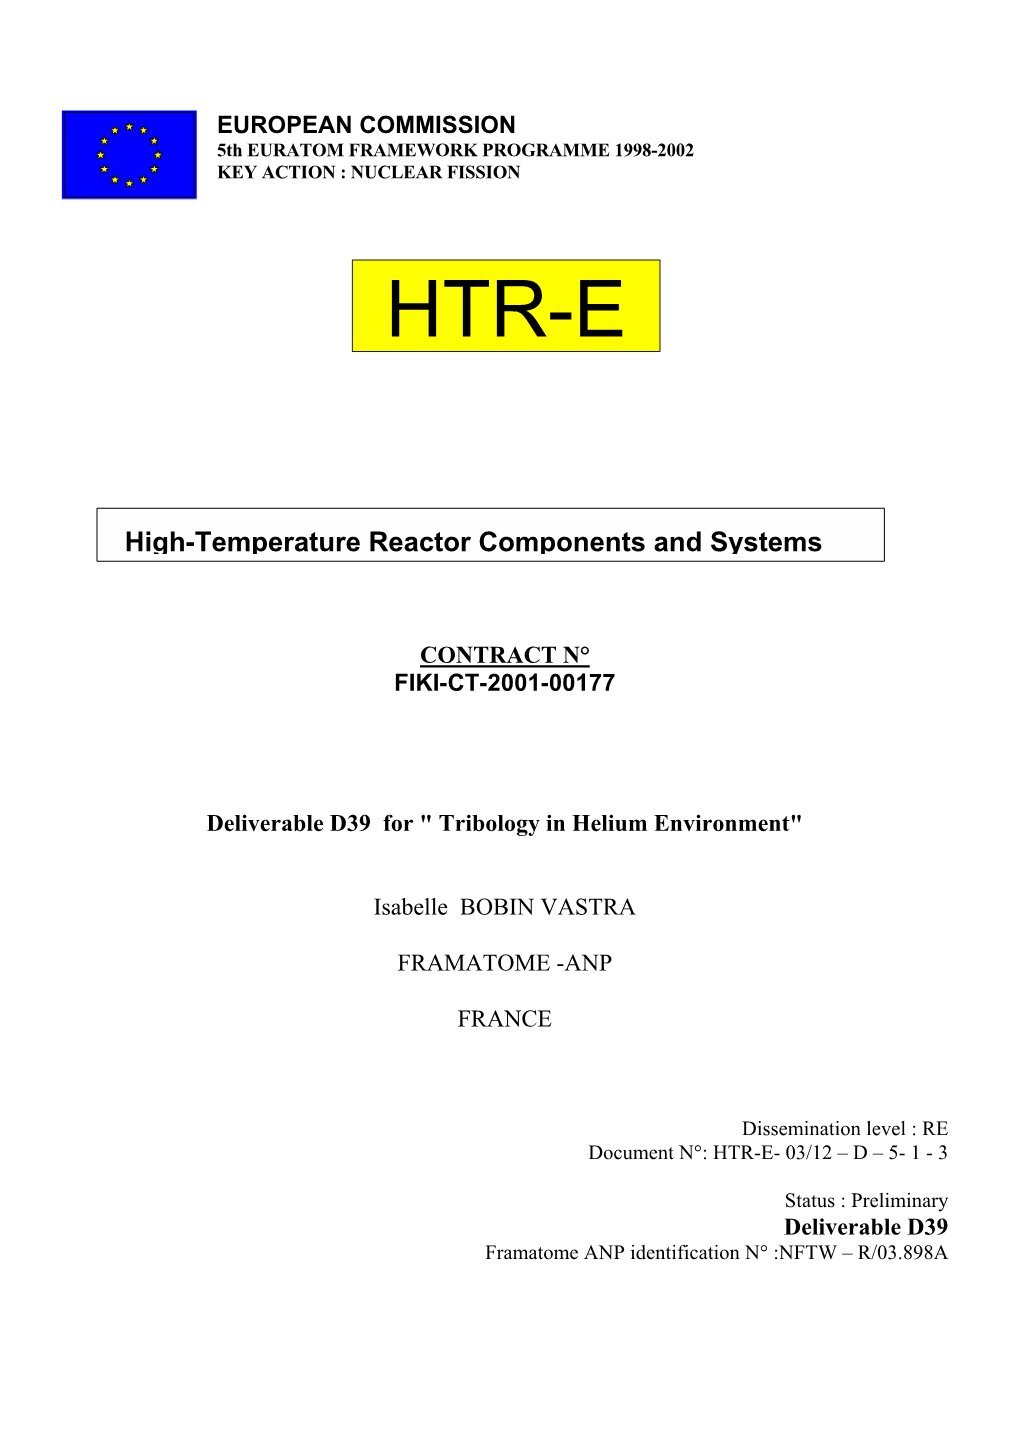 High-Temperature Reactor Components and Systems